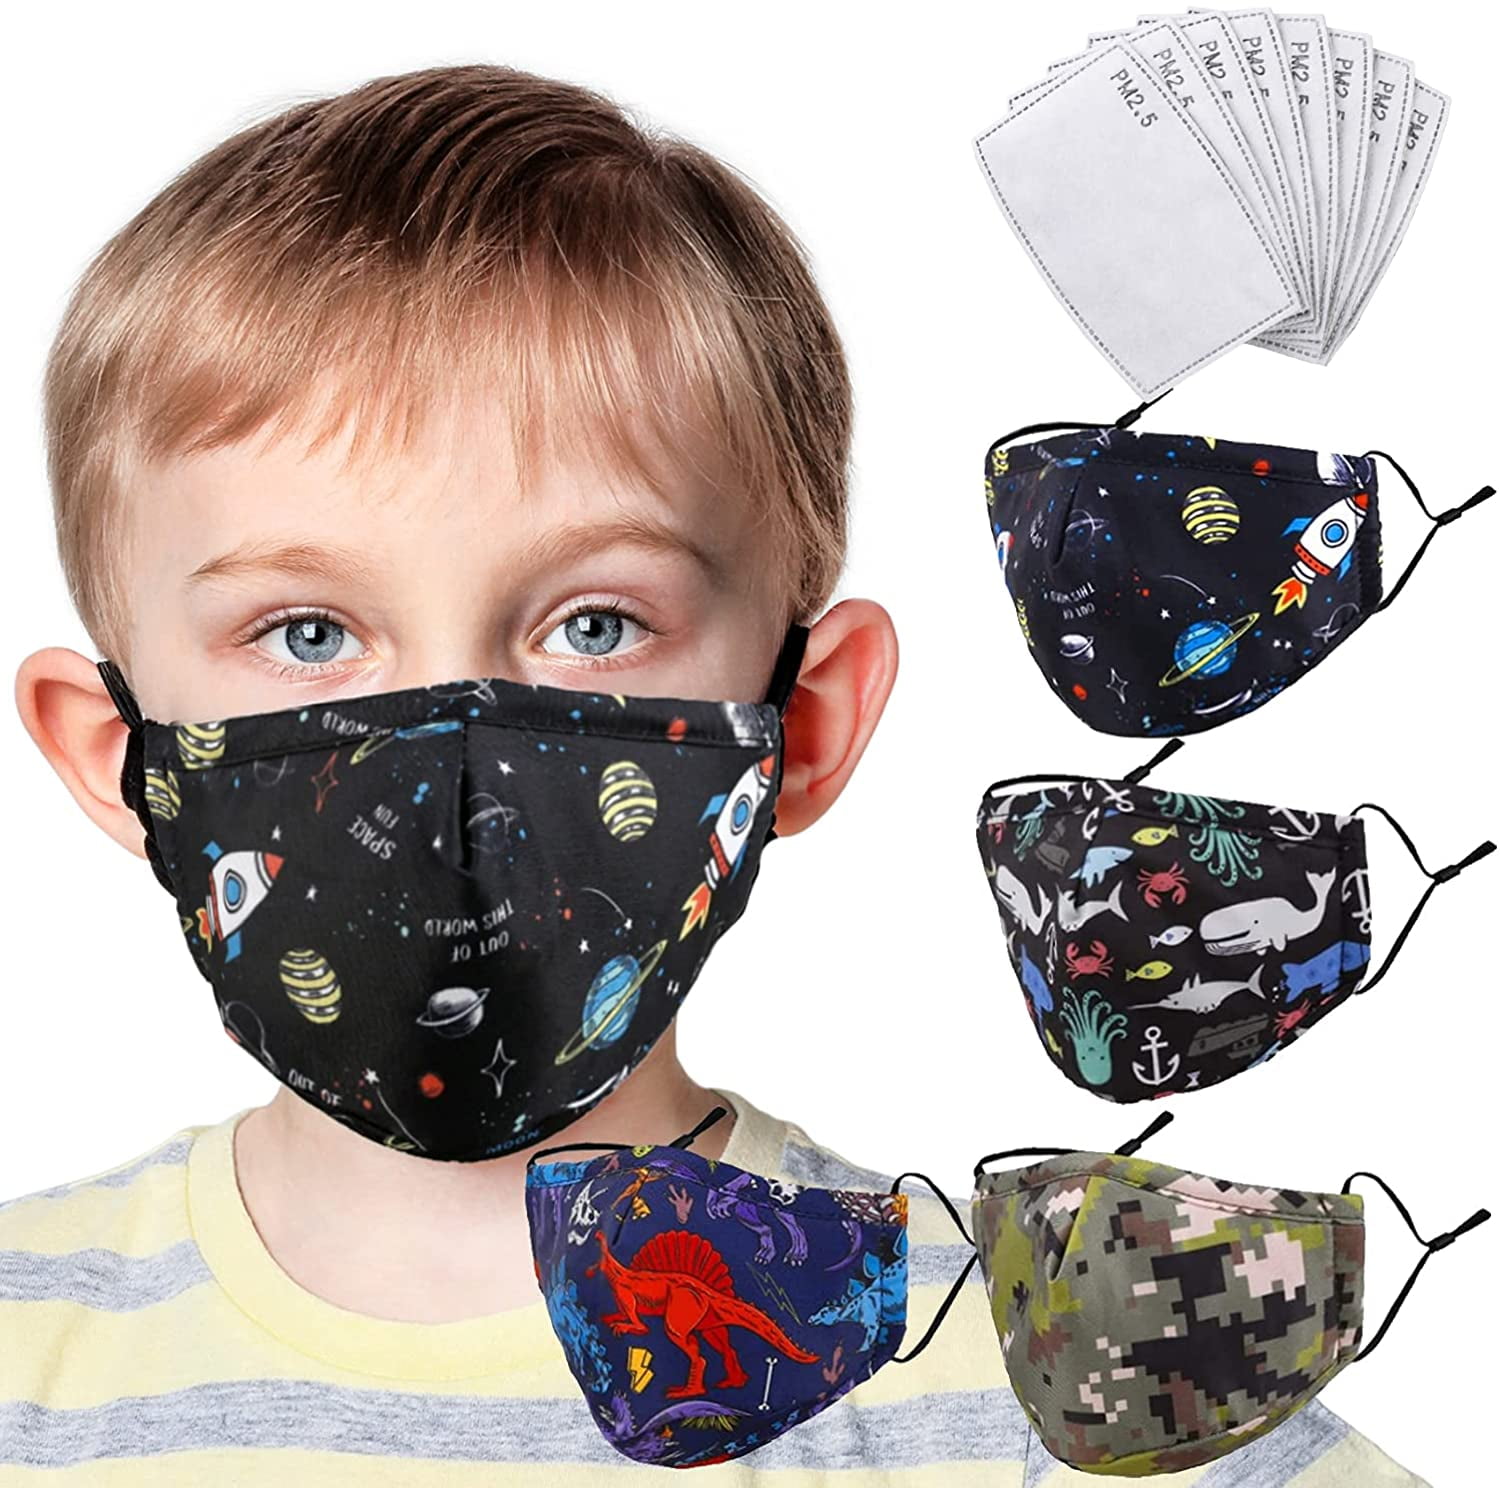 Sunsee Unisex Kids Disposable Mouth and Nose C_Over_Mascks Balaclavas 3-Layer Outdoor Dust Protetive Face Madks Bandana for 4-10 Years Old Children Blue, 10PC 